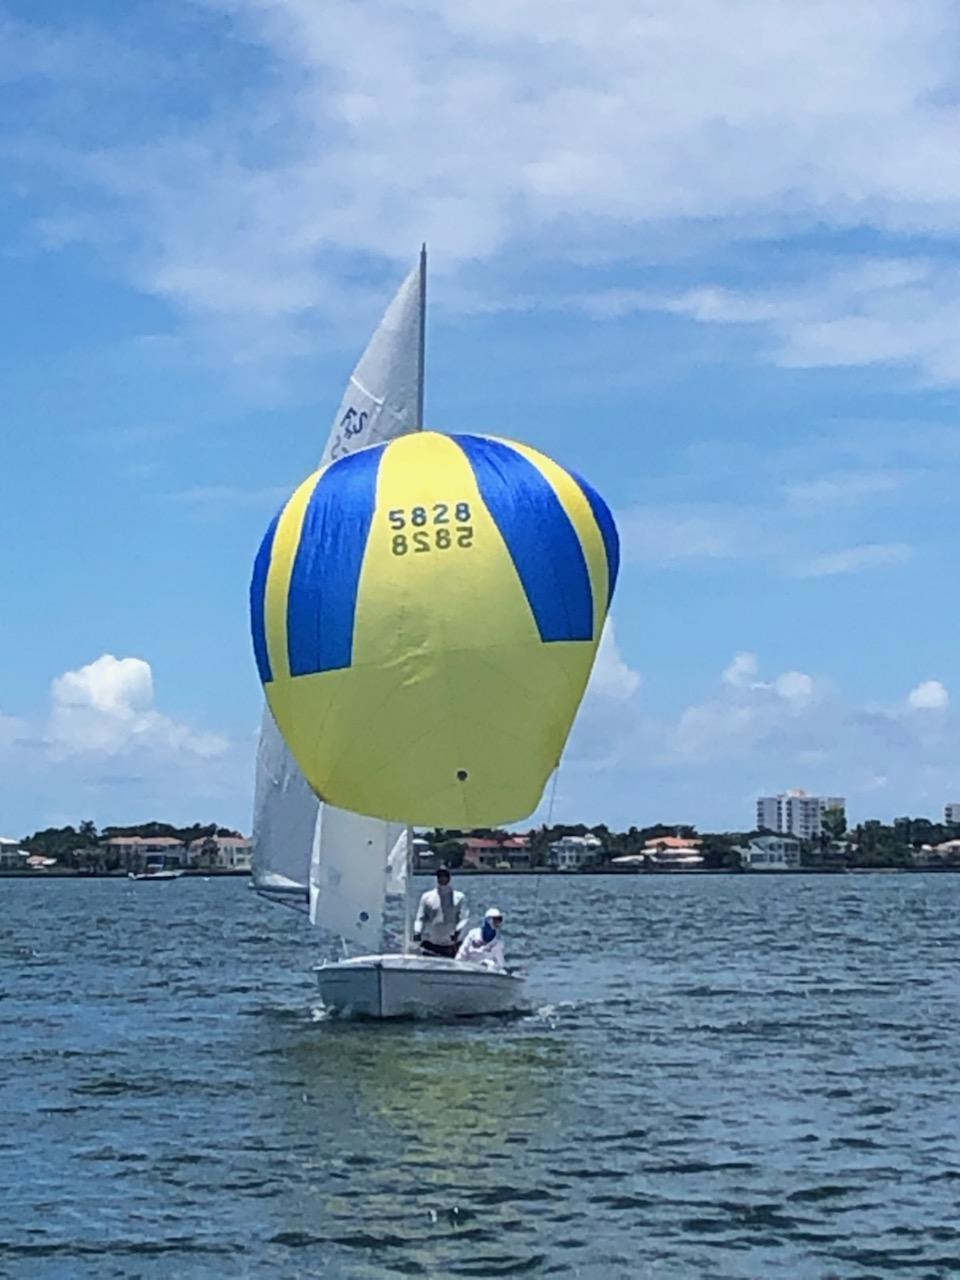 Courtesy. PGT Innovations executive Brad West sails a Flying Scot sailboat on Sarasota Bay and is a member of the Sarasota Sailing Squadron.